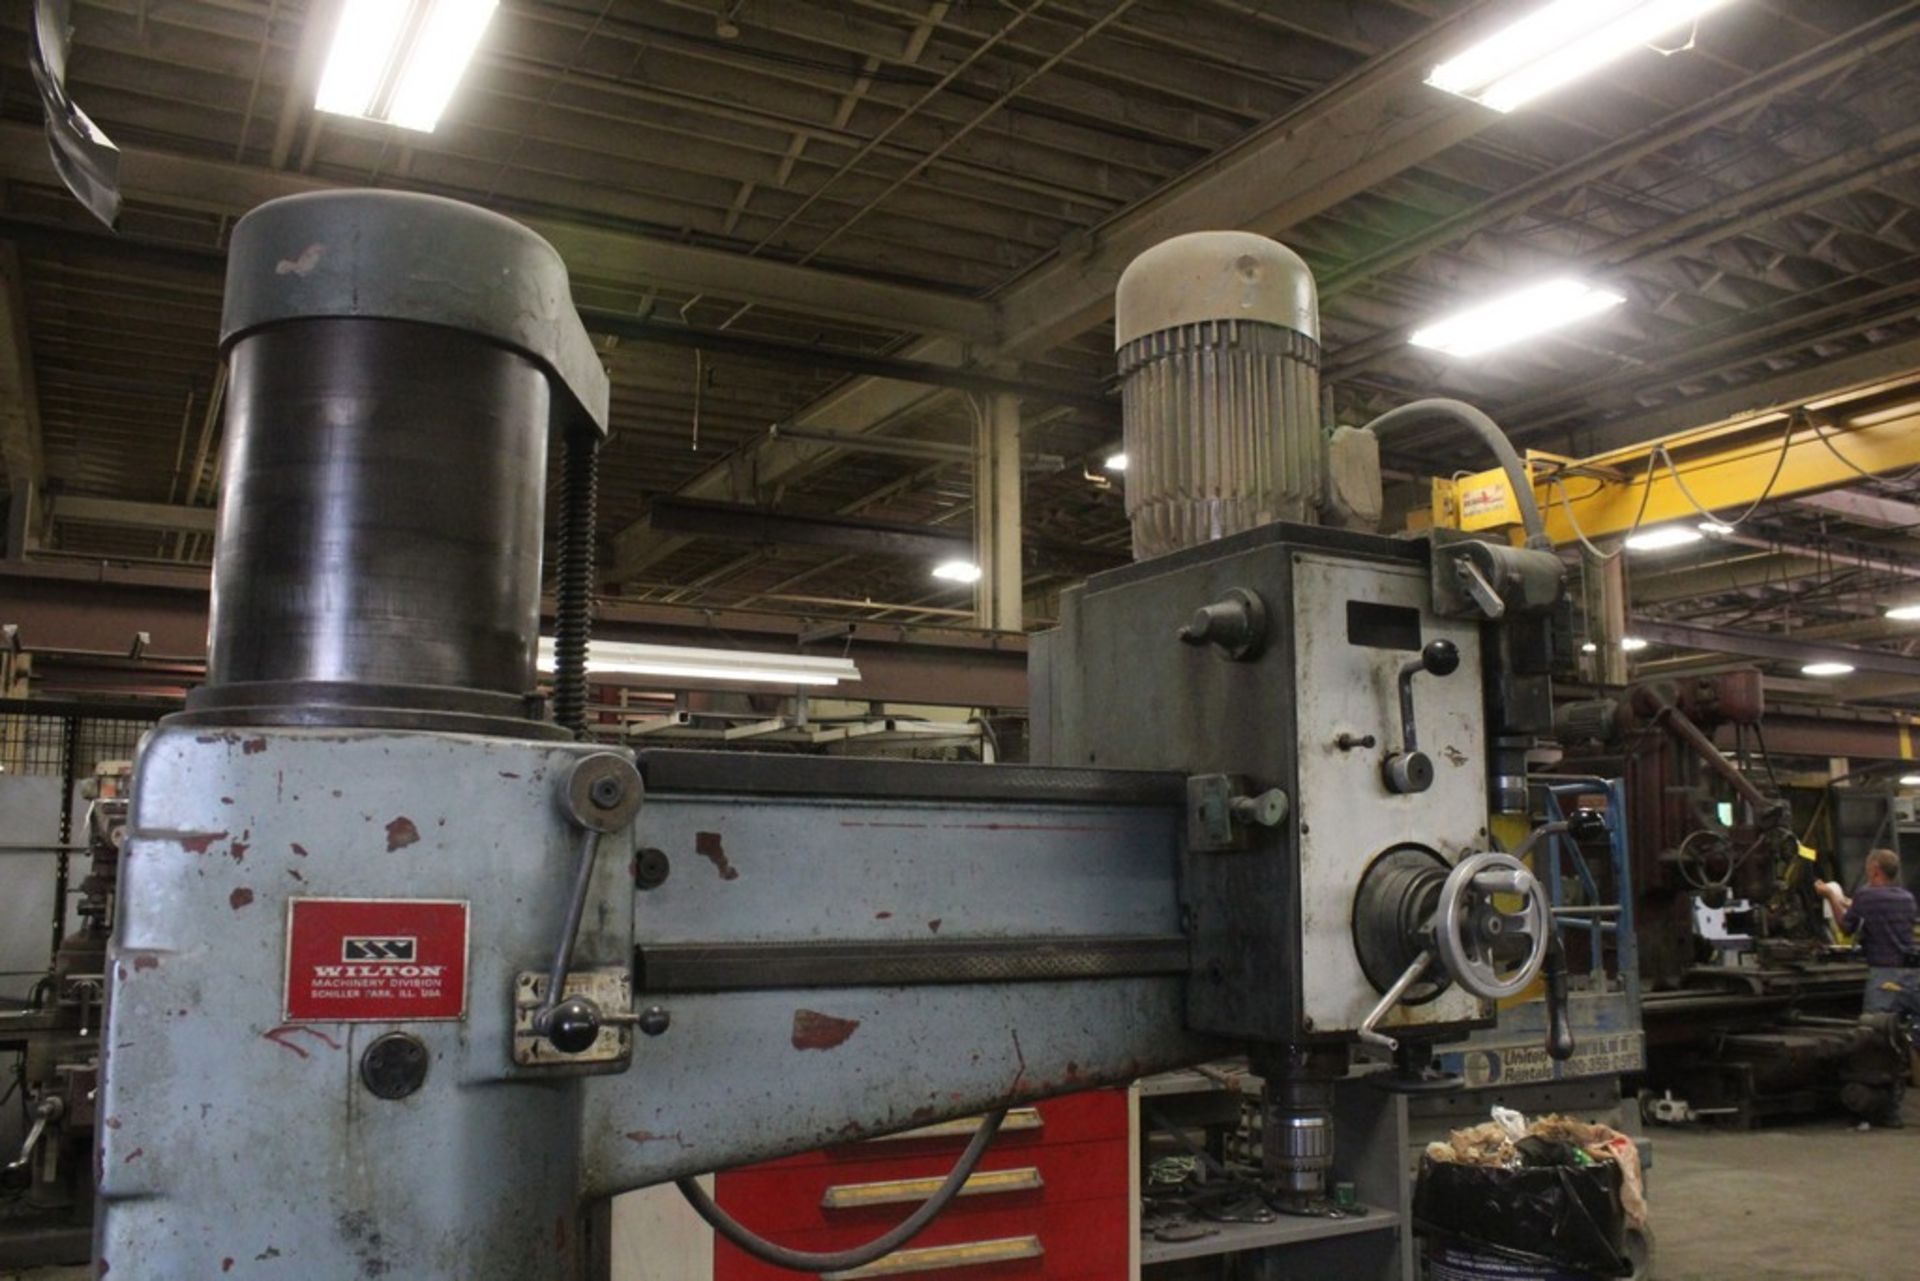 WILTON 4’ ARM 12” COLUMN RADIAL ARM DRILL WITH BOX TABLE Loading Fee: $300 - Image 6 of 7